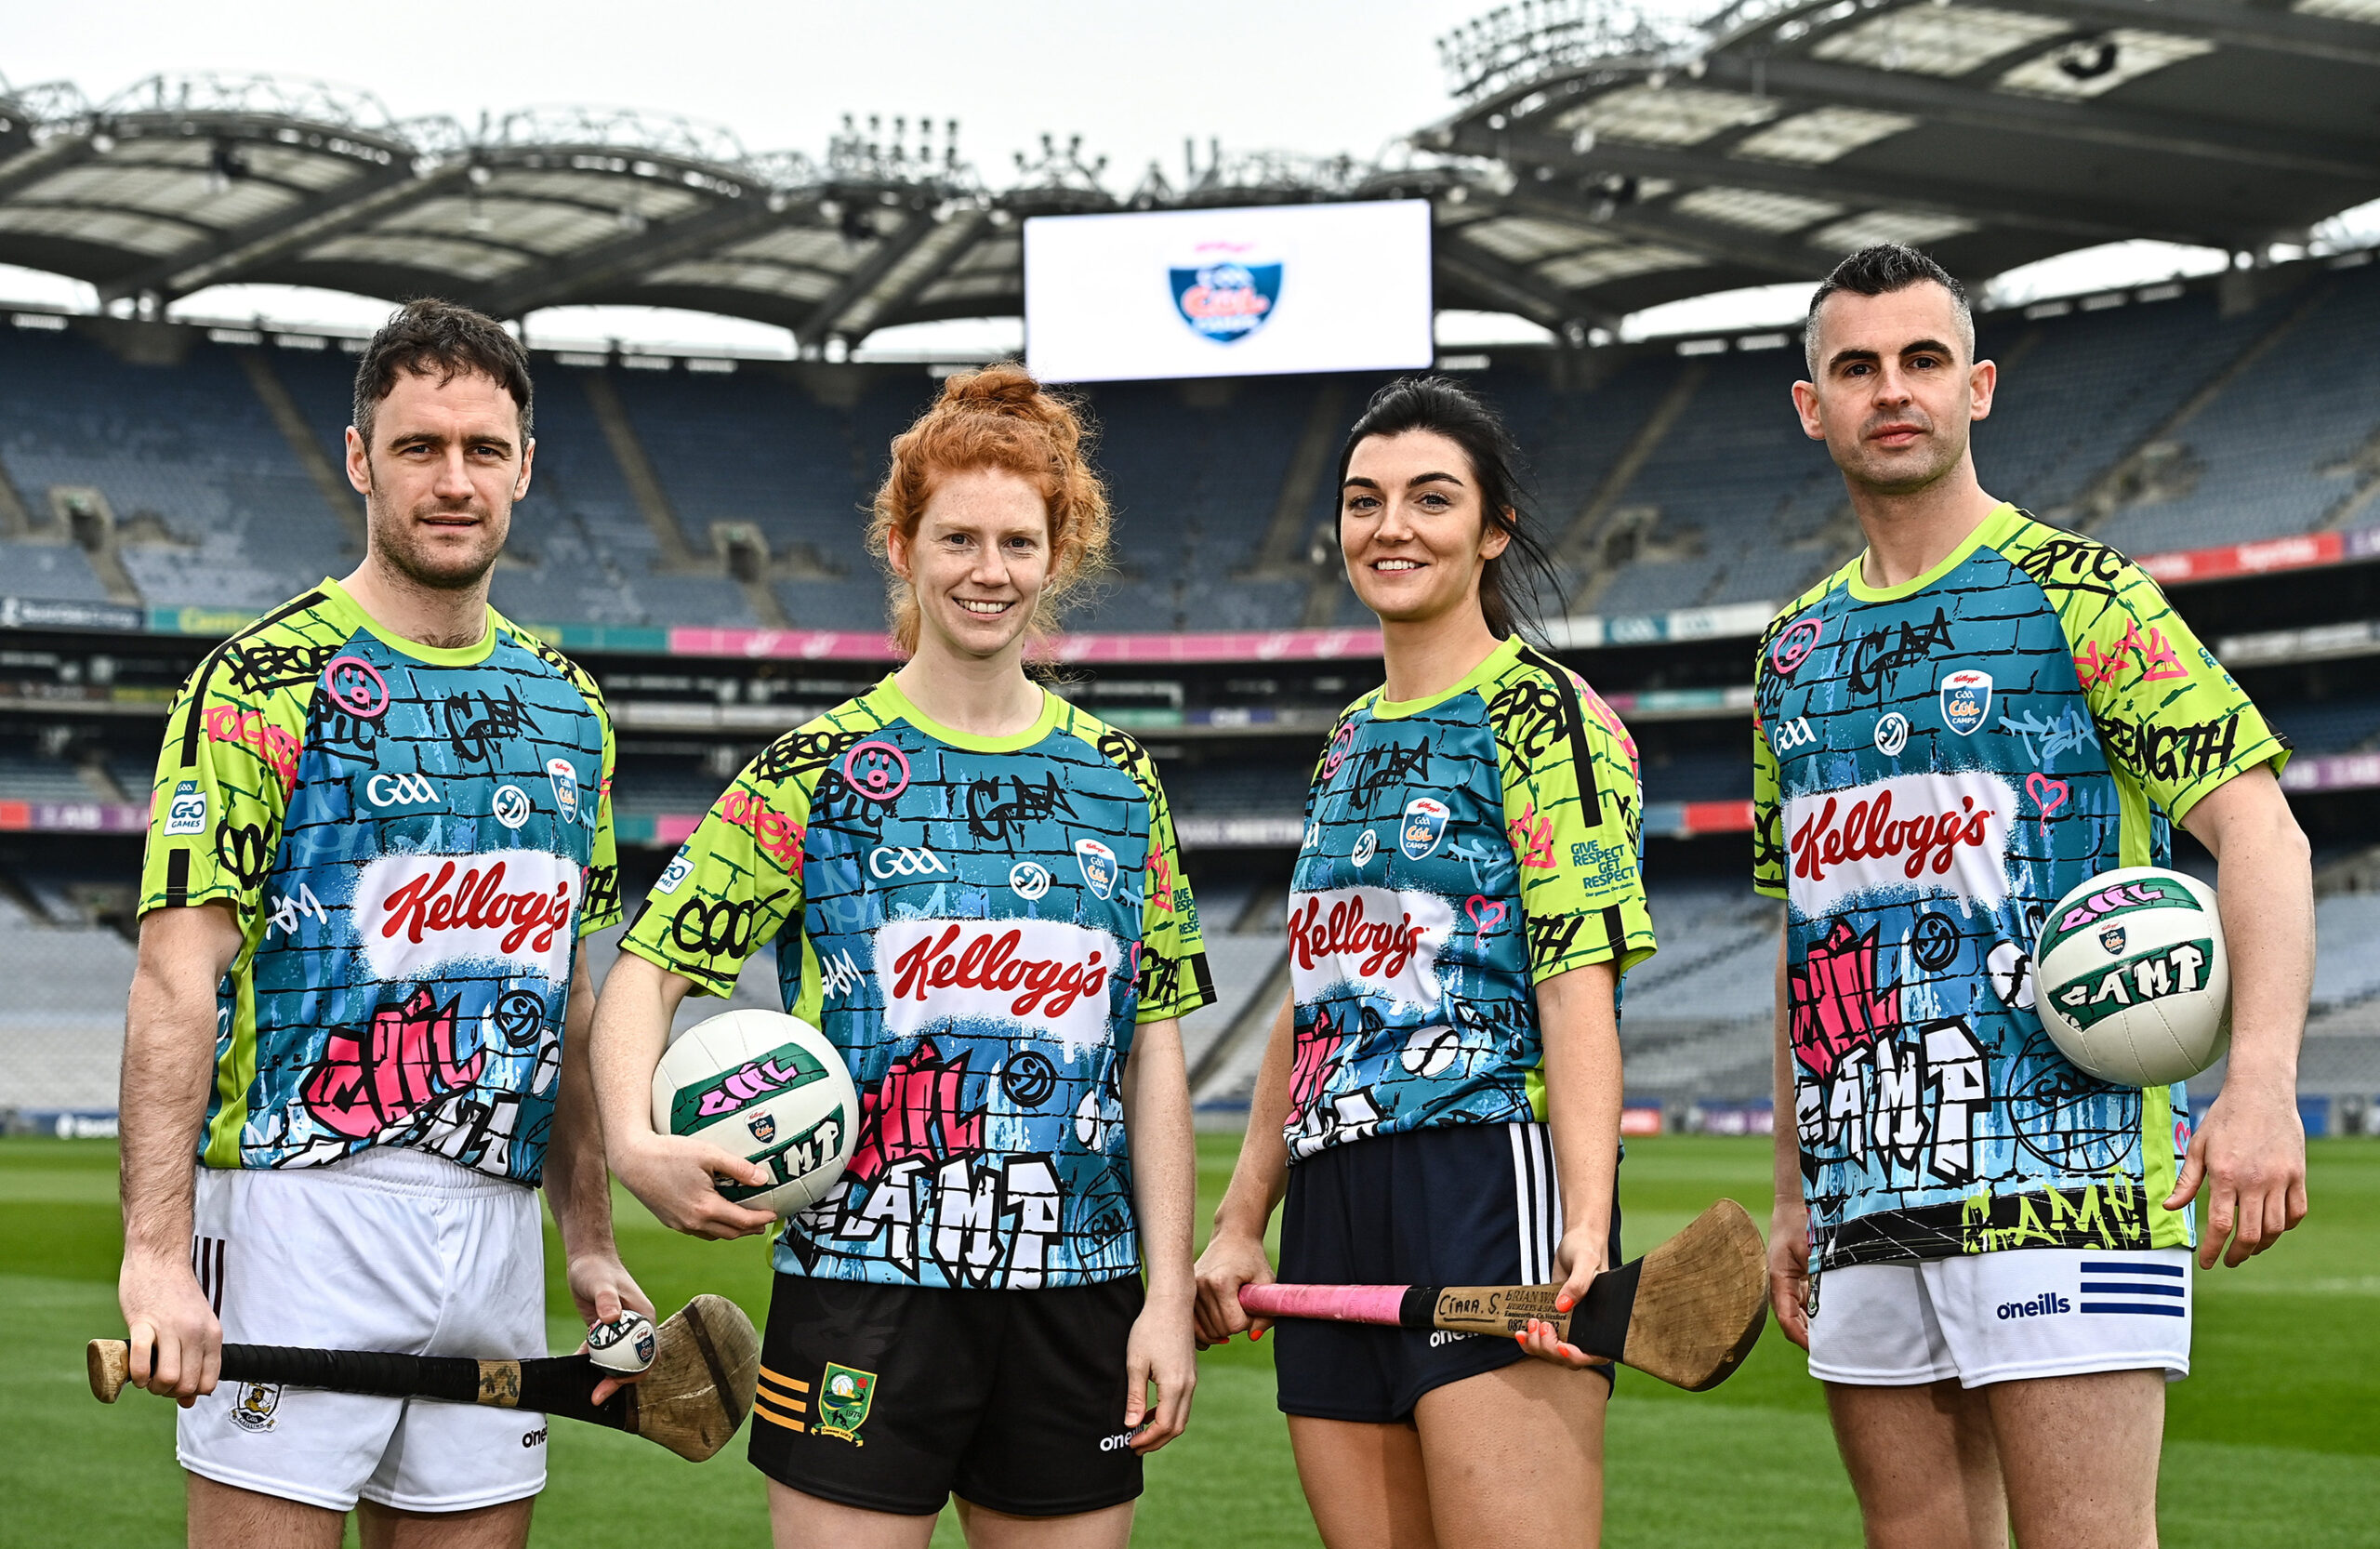 €40,000 up for grabs for Wicklow GAA clubs through Kellogg’s GAA Cúl Camps on-pack competition